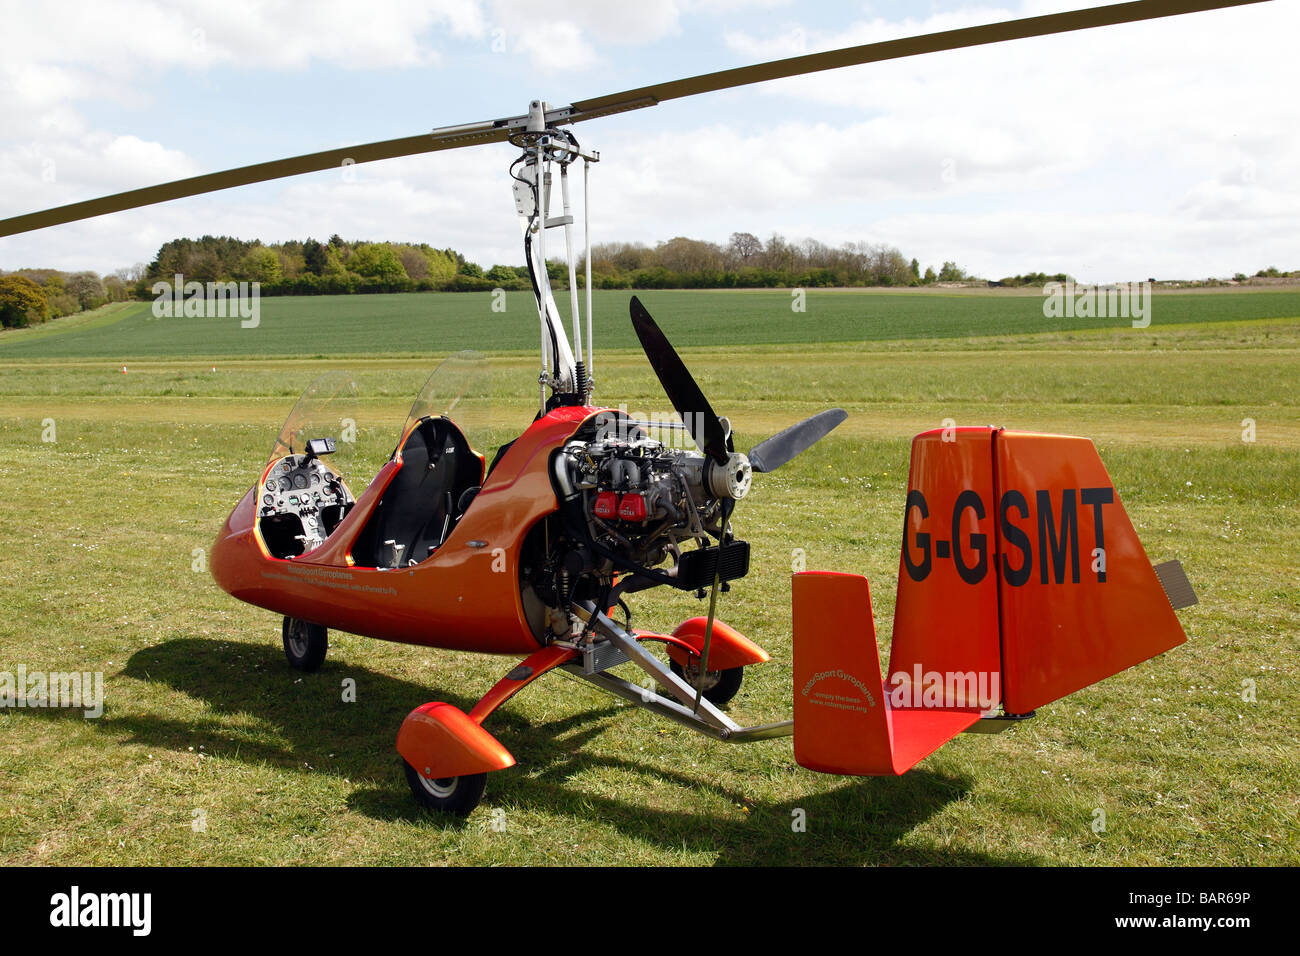 An autogyro flying at Popham airfield in Hampshire in England Stock Photo